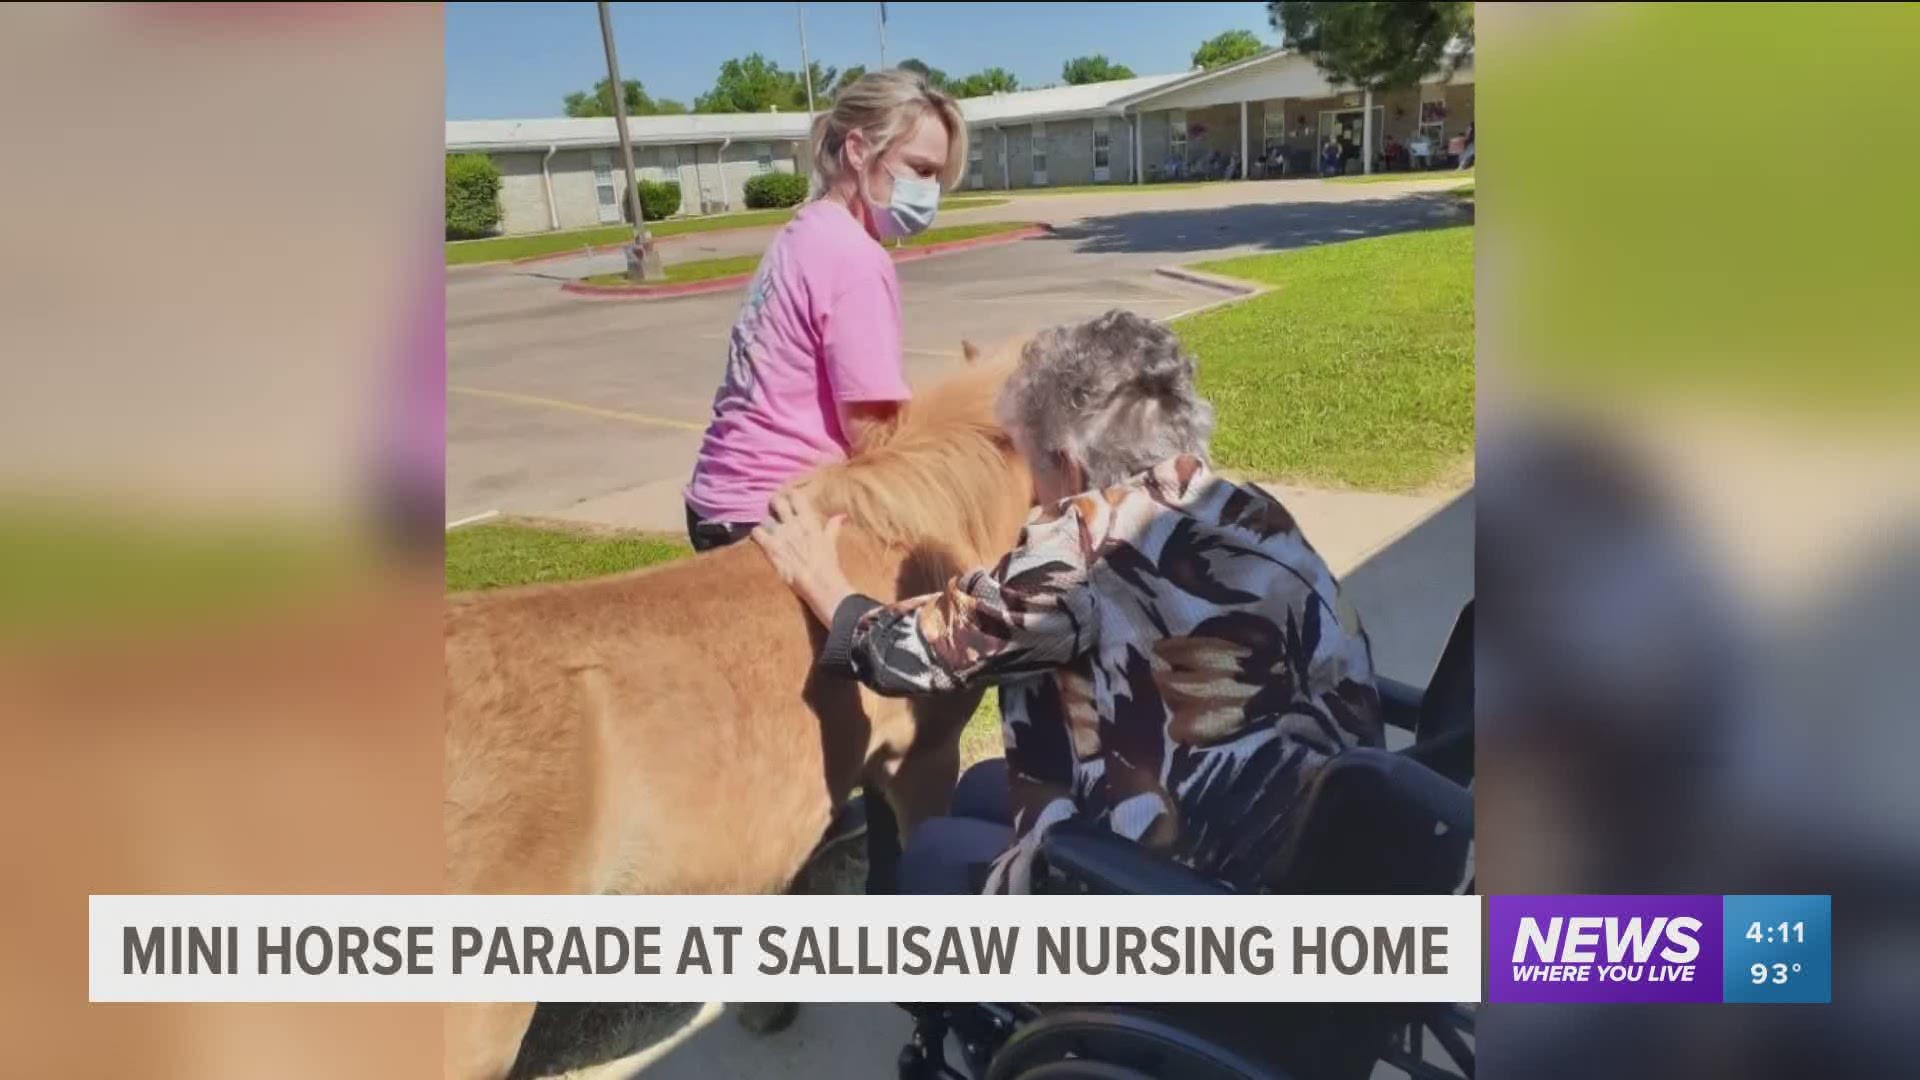 Residents were treated to a parade of miniature horses outside of the nursing home.